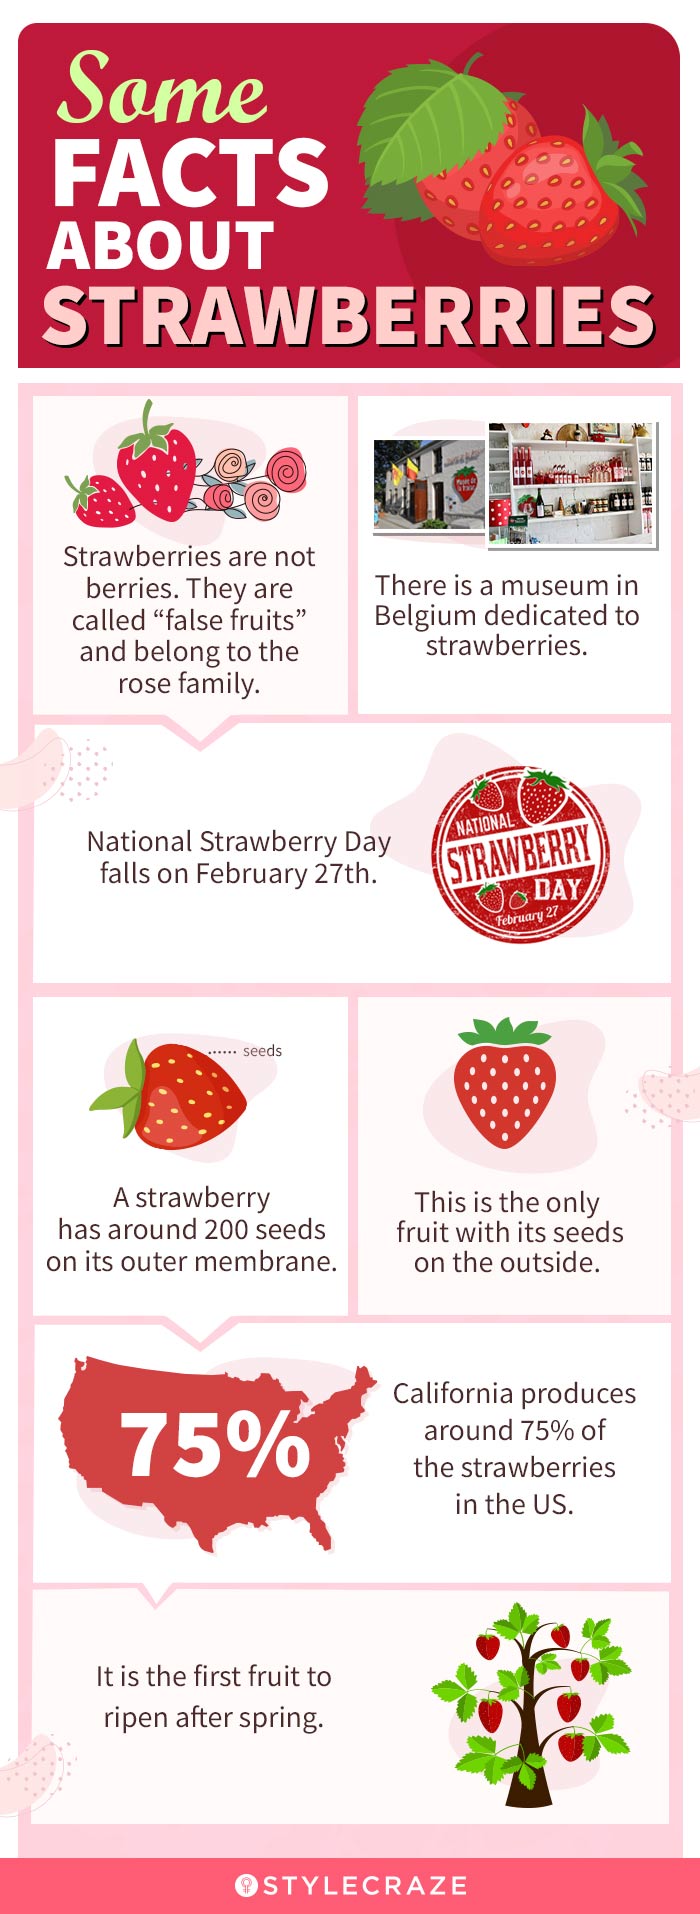 some facts about strawberries (infographic)